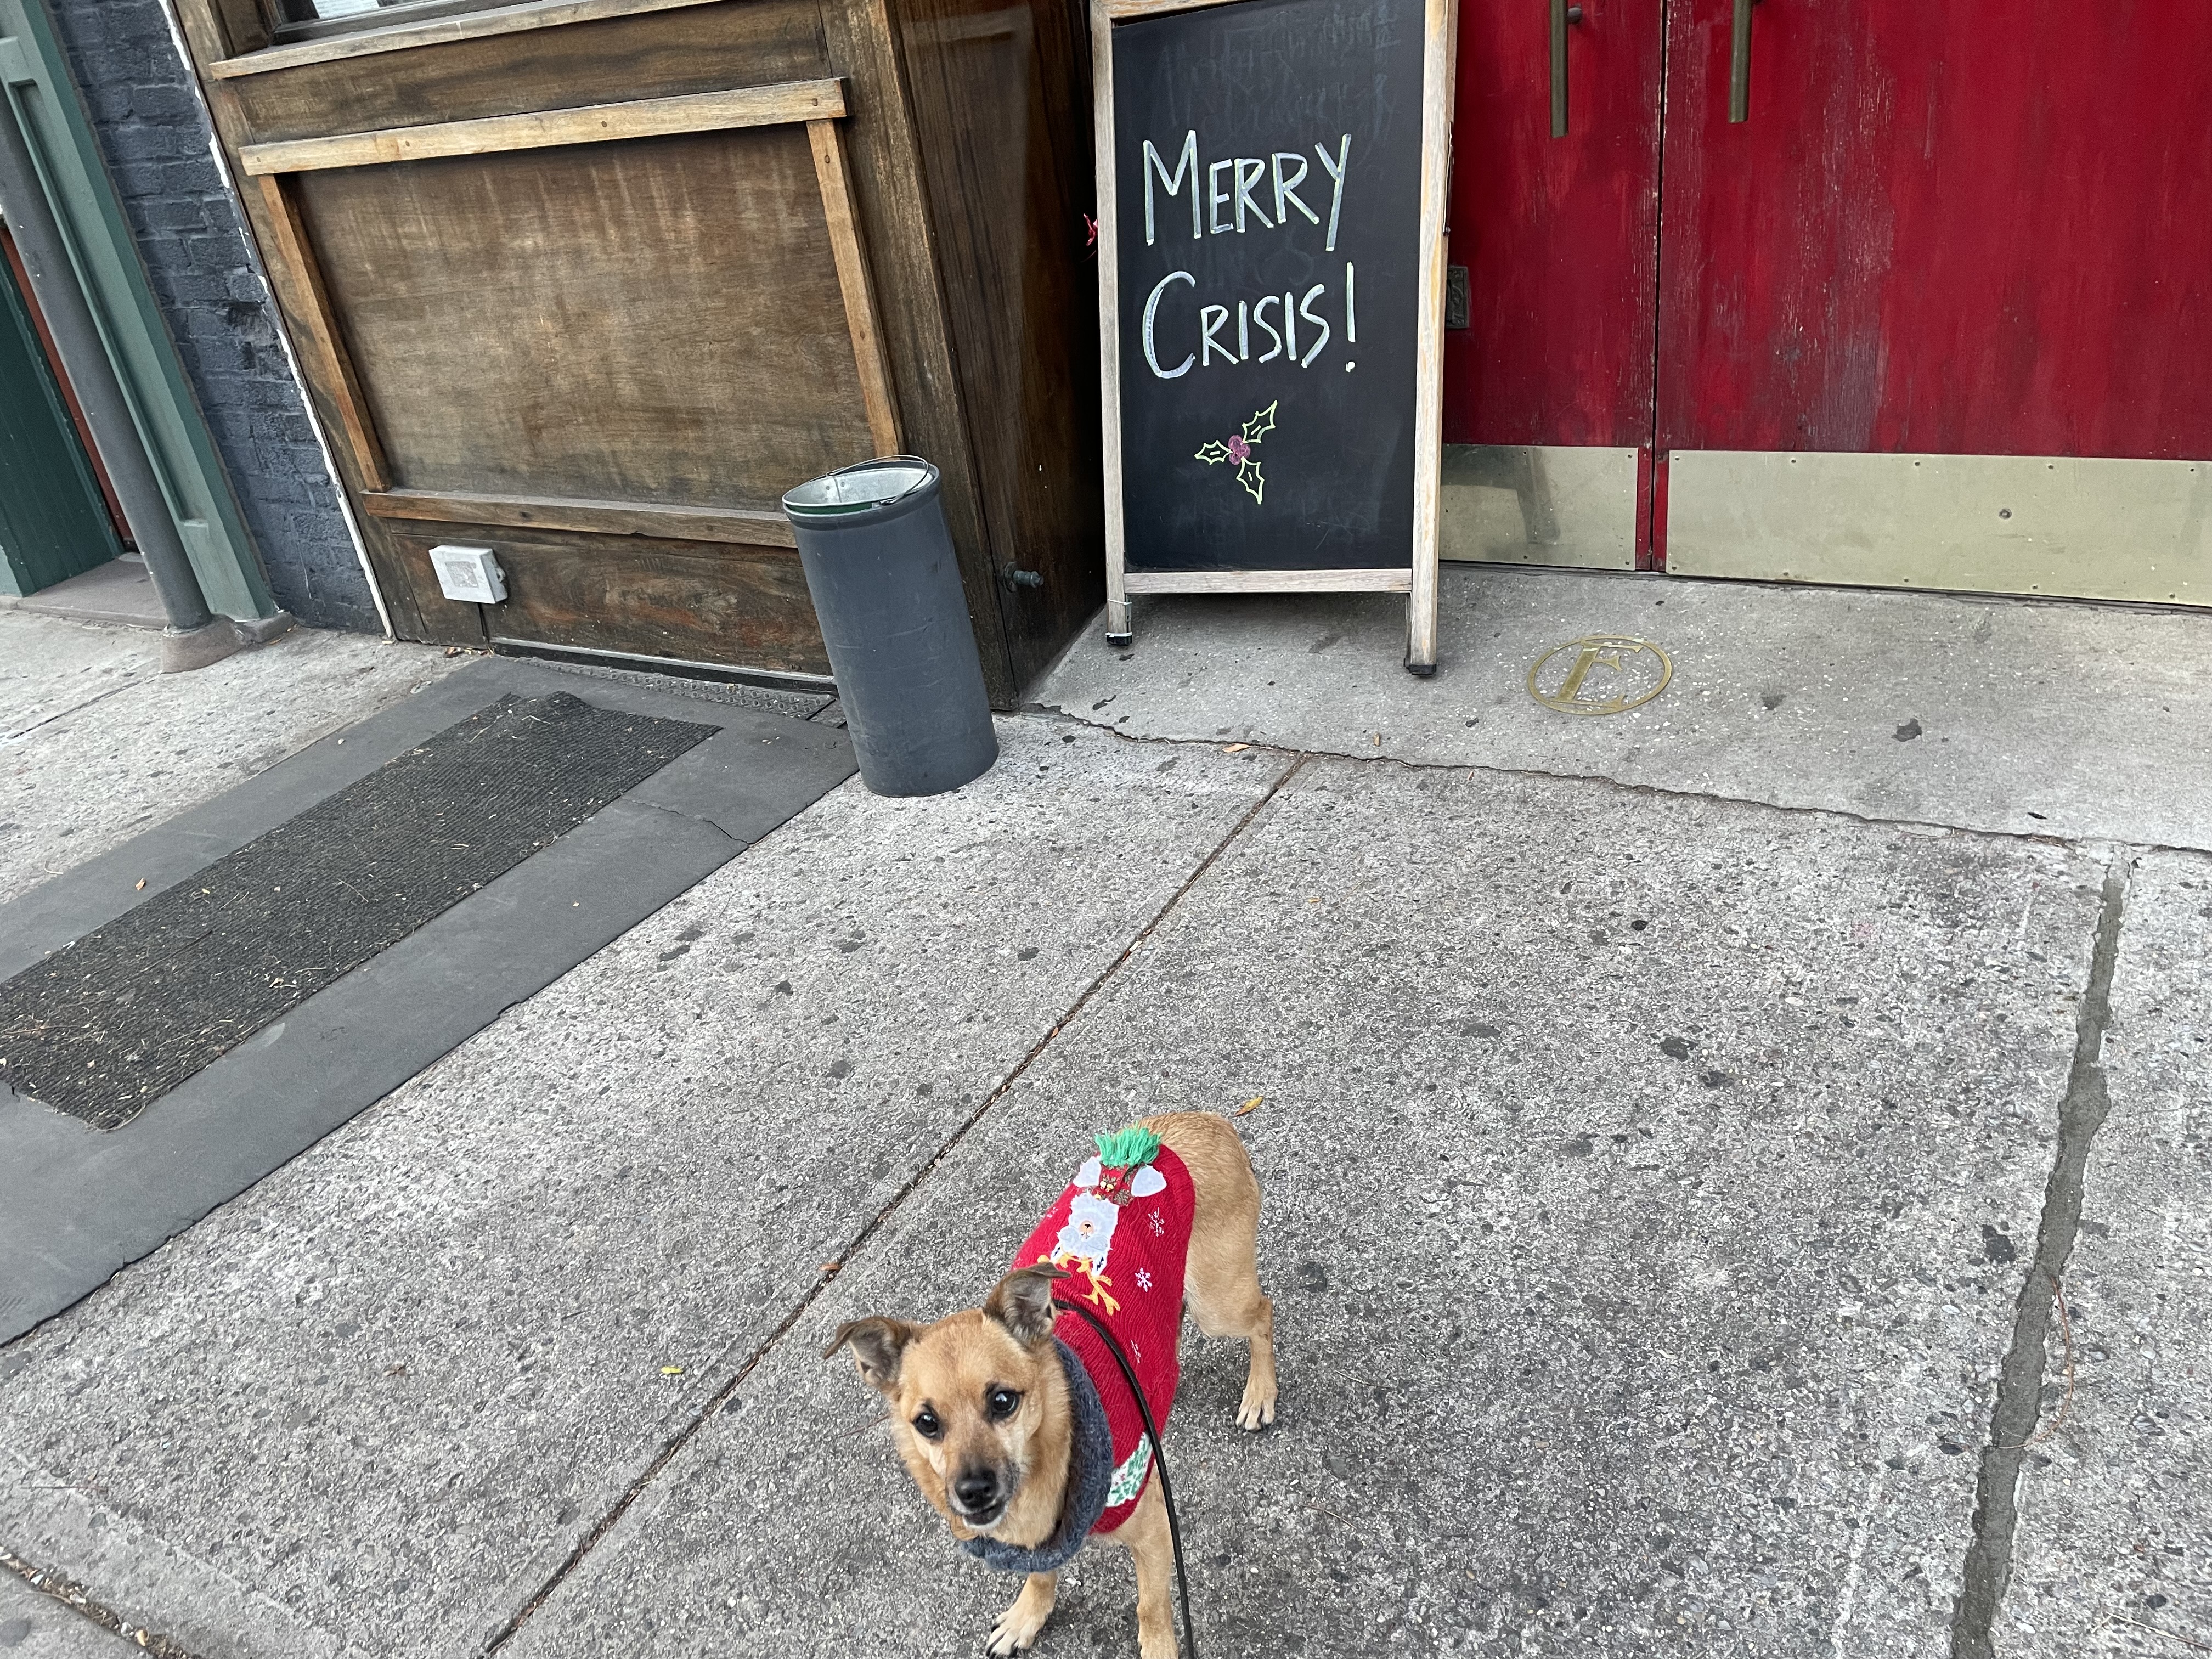 A small dog in a Christmas sweater stands on a sidewalk in Brooklyn in front of a chalkboard sign that says Merry Crisis!